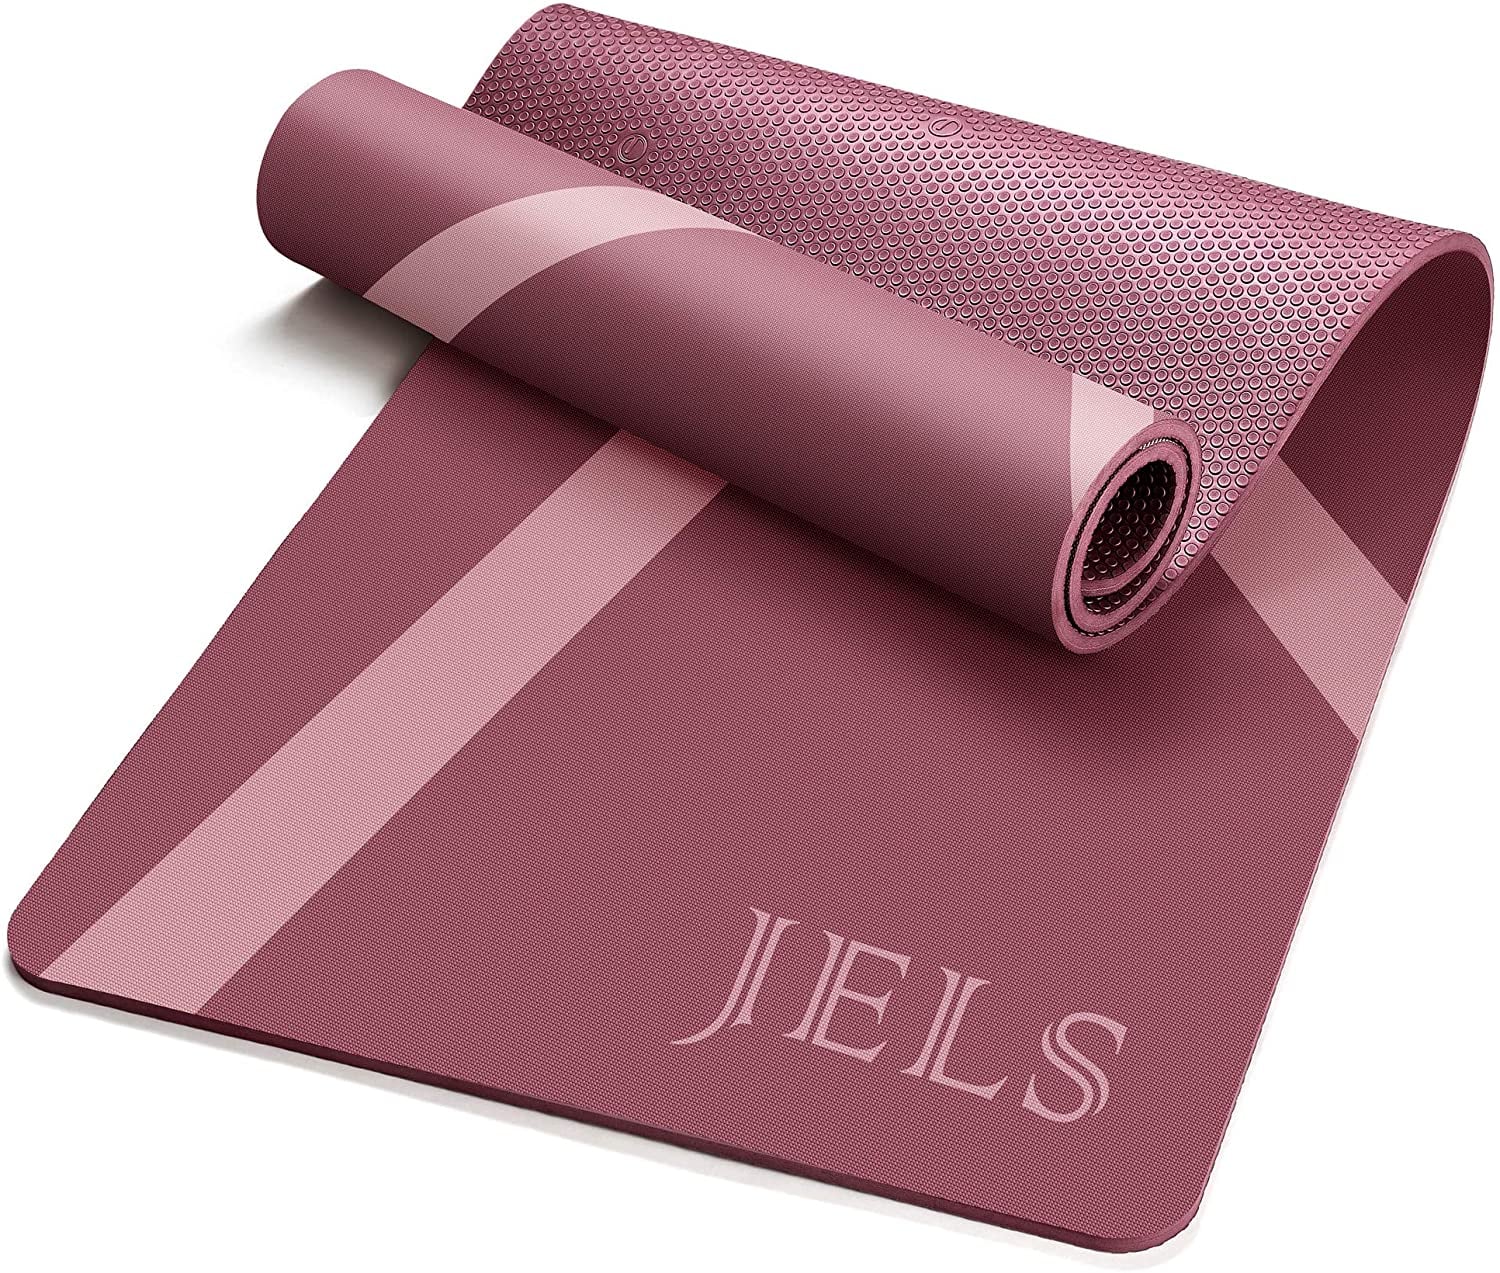 why are yoga mats so expensive